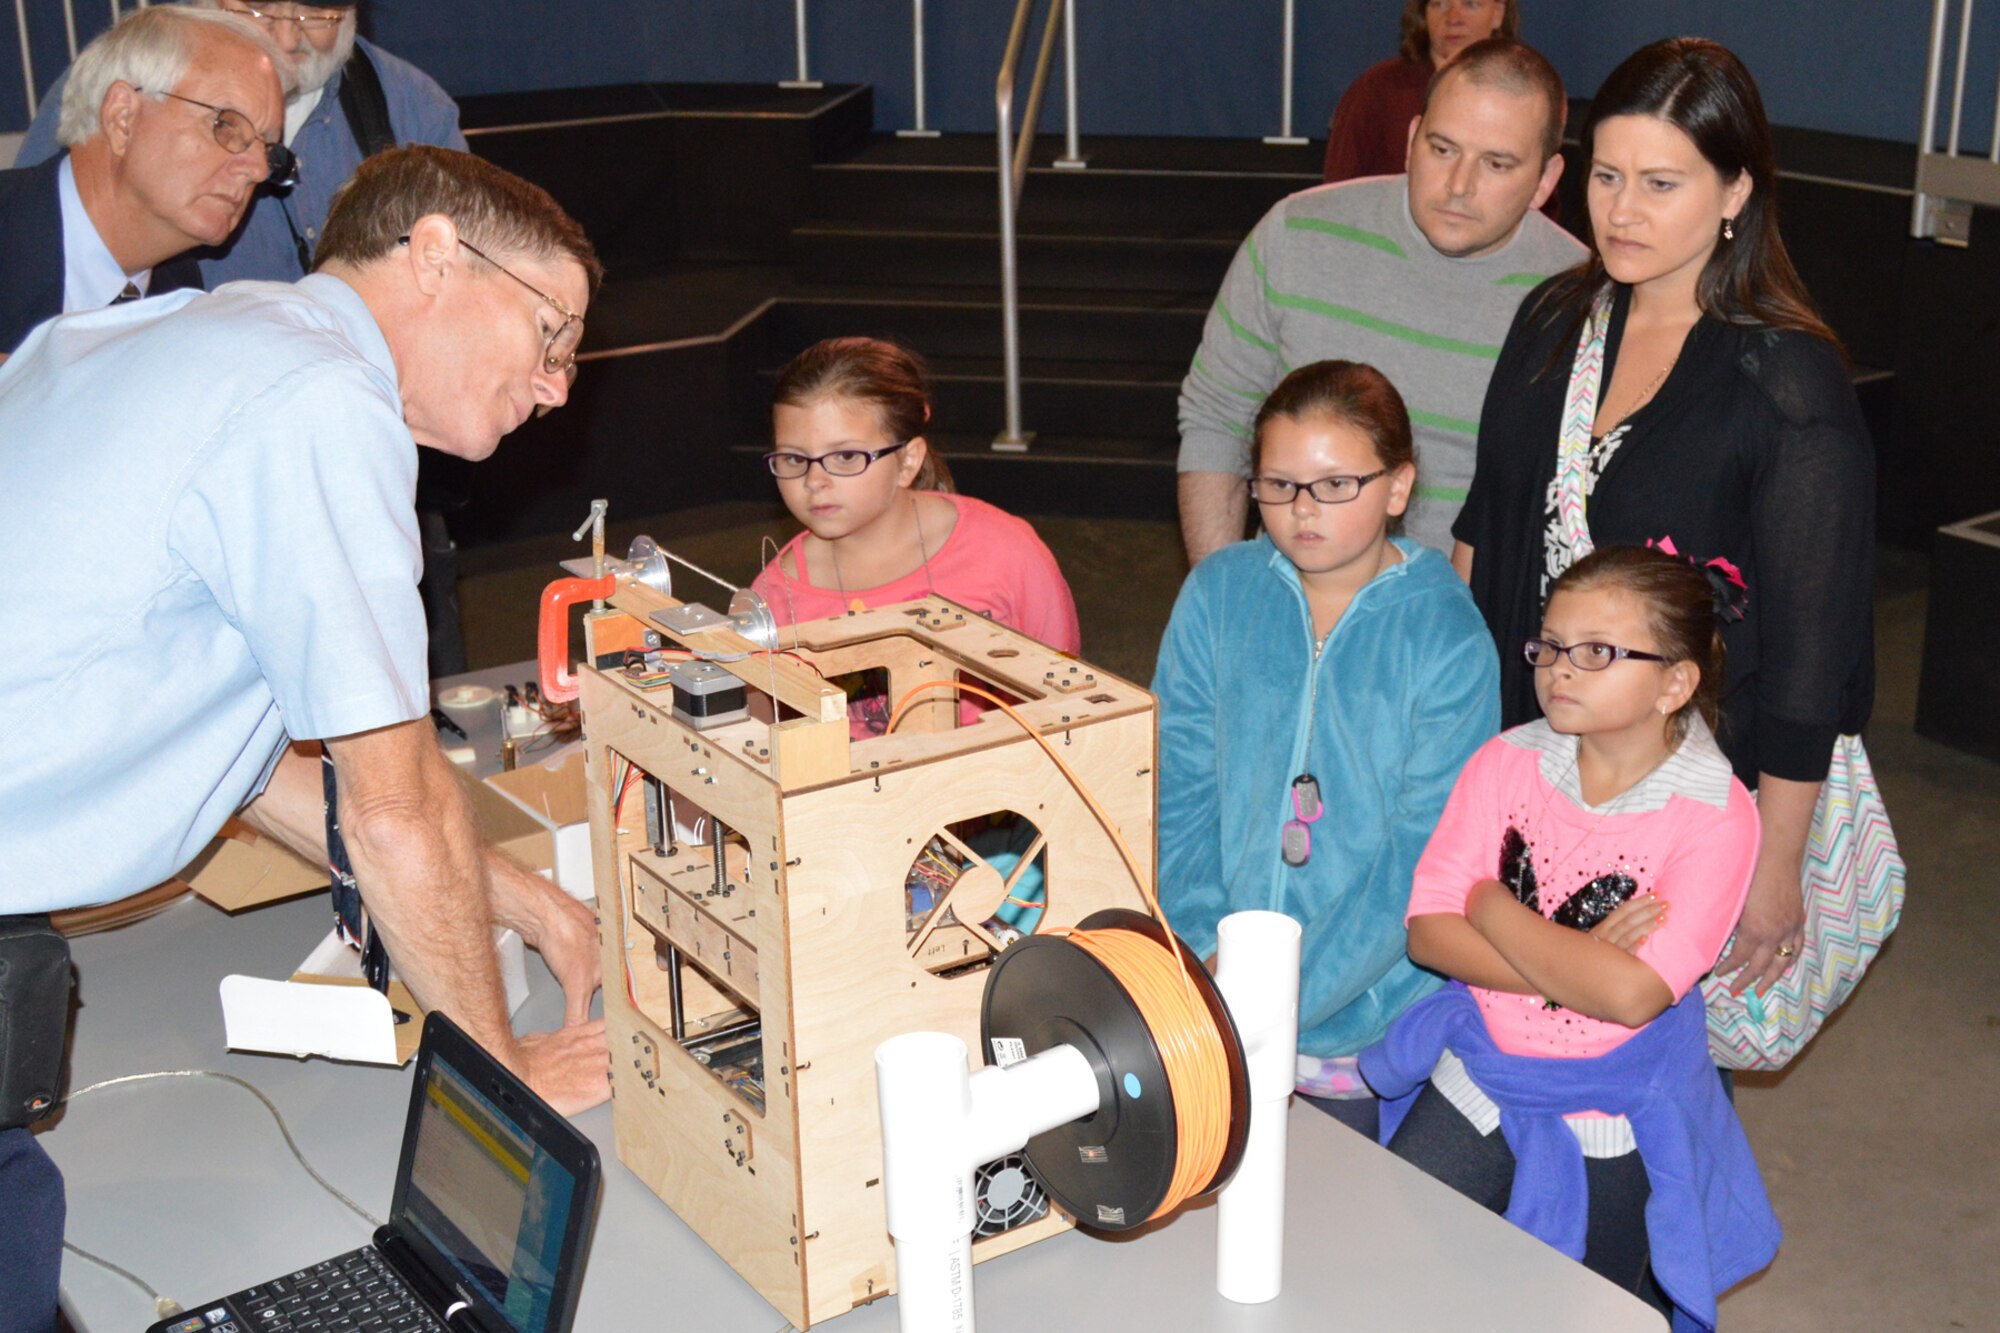 DAYTON, Ohio -- Students participate in aerospace demonstration stations during Home School Day on October 6, 2014, at the National Museum of the U.S. Air Force. (U.S. Air Force photo)